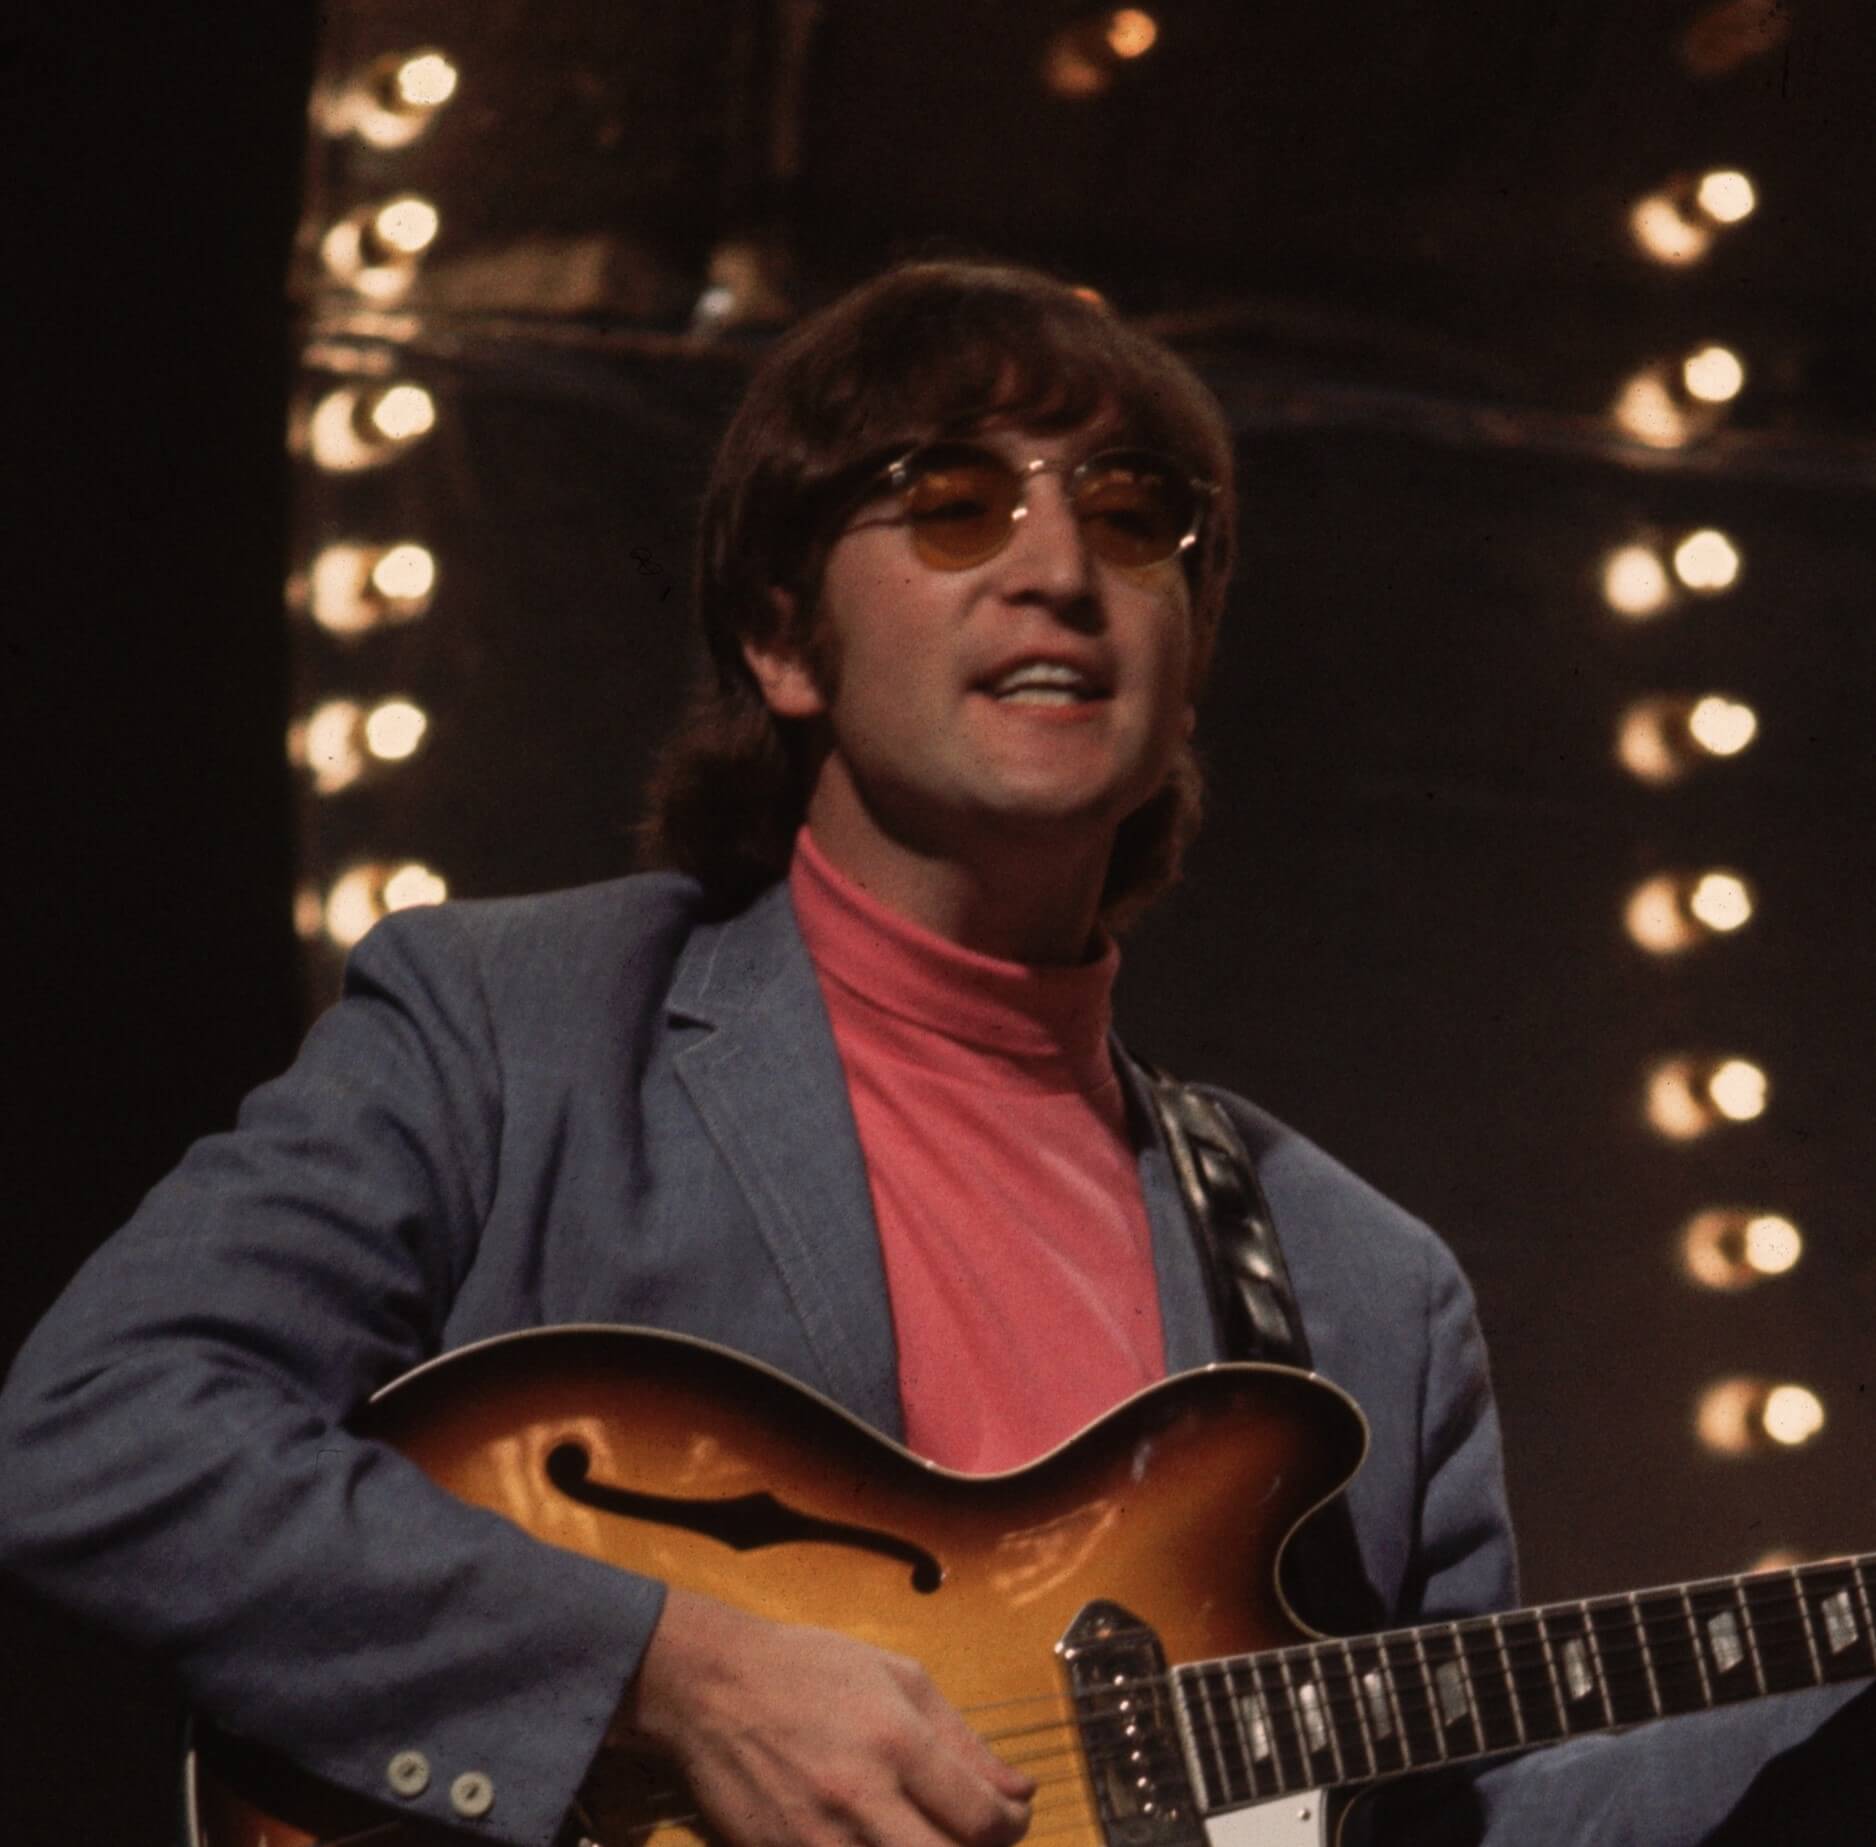 "Power to the People" singer John Lennon with a guitar